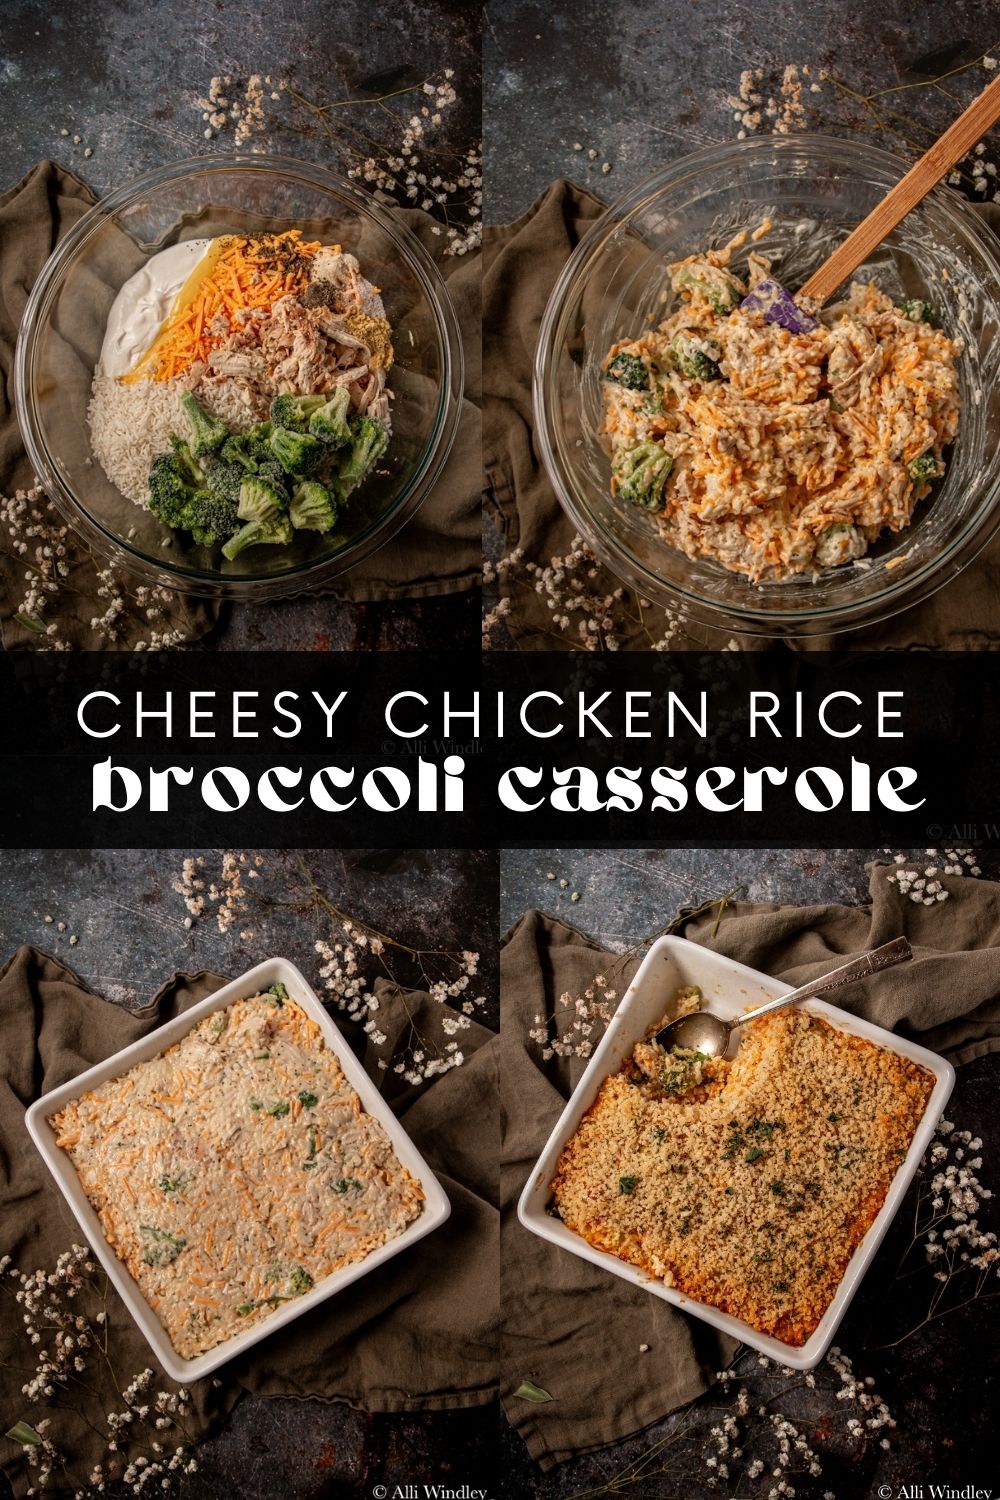 Chicken rice broccoli casserole is the perfect weeknight meal for busy families. Leftover cooked chicken, broccoli (fresh or frozen!), and a creamy, cheesy sauce come together to create a comforting casserole that's easier to make than you think!